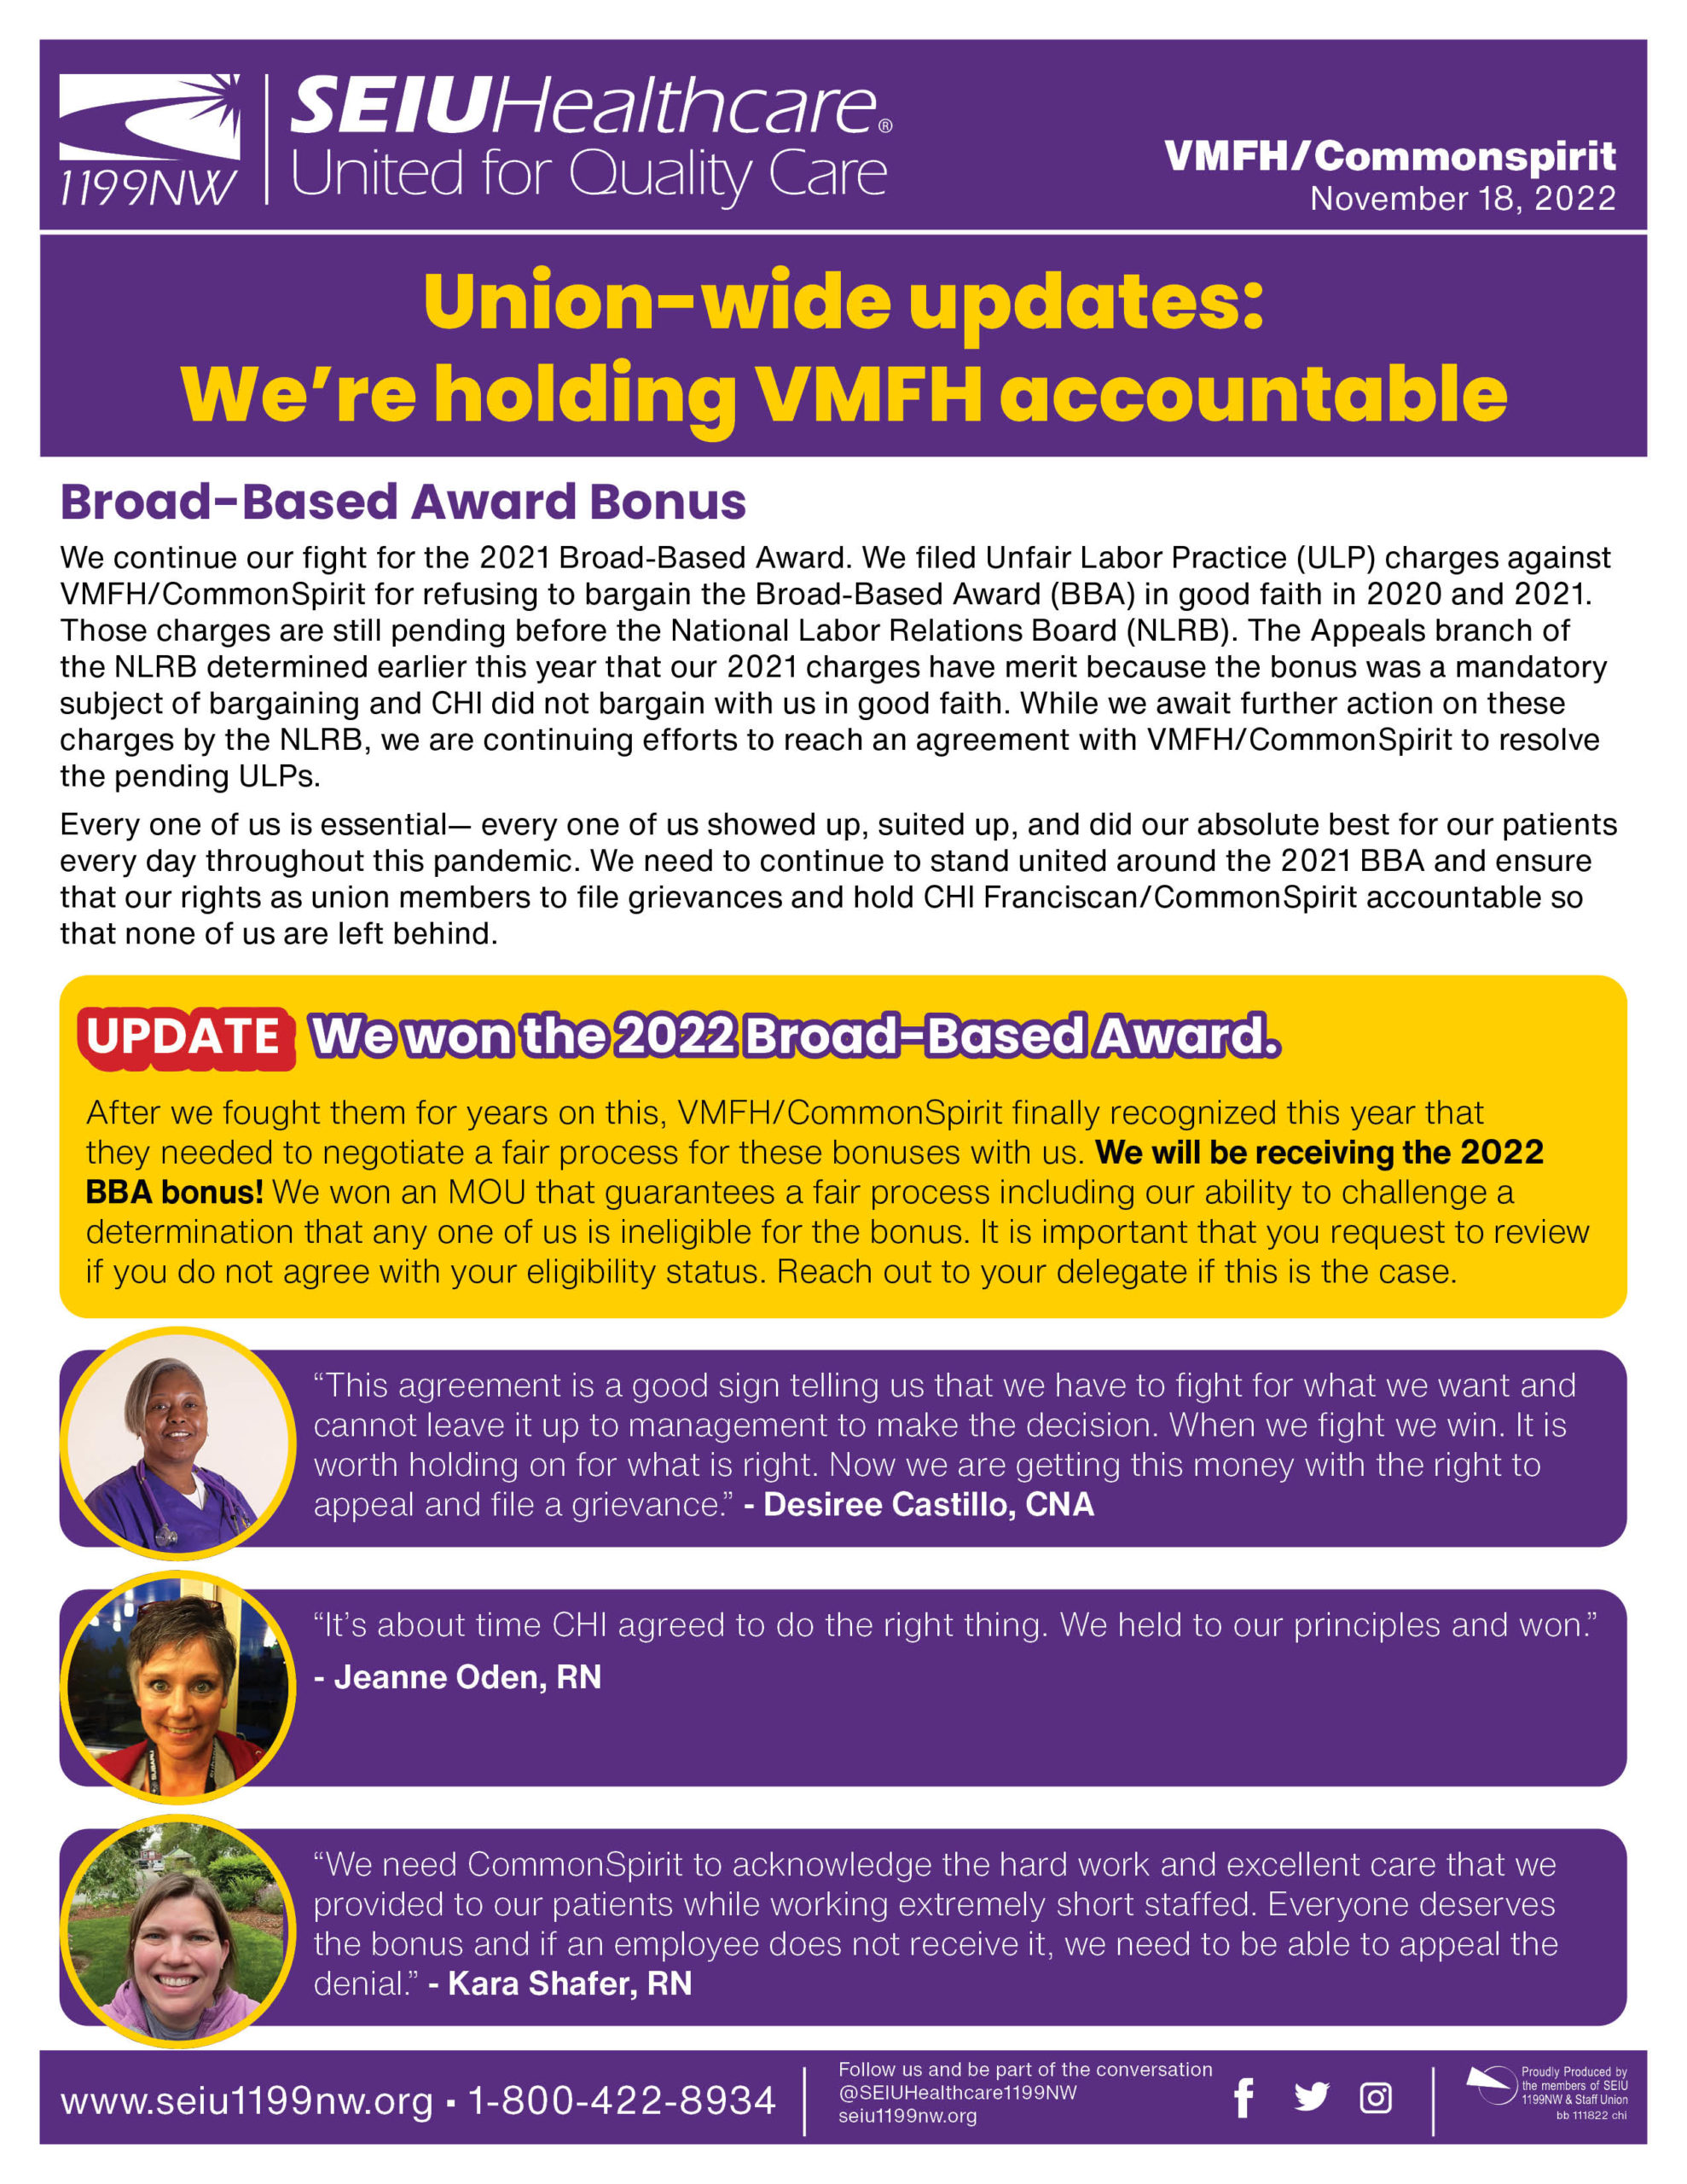 Union-wide updates: We’re holding VMFH accountable